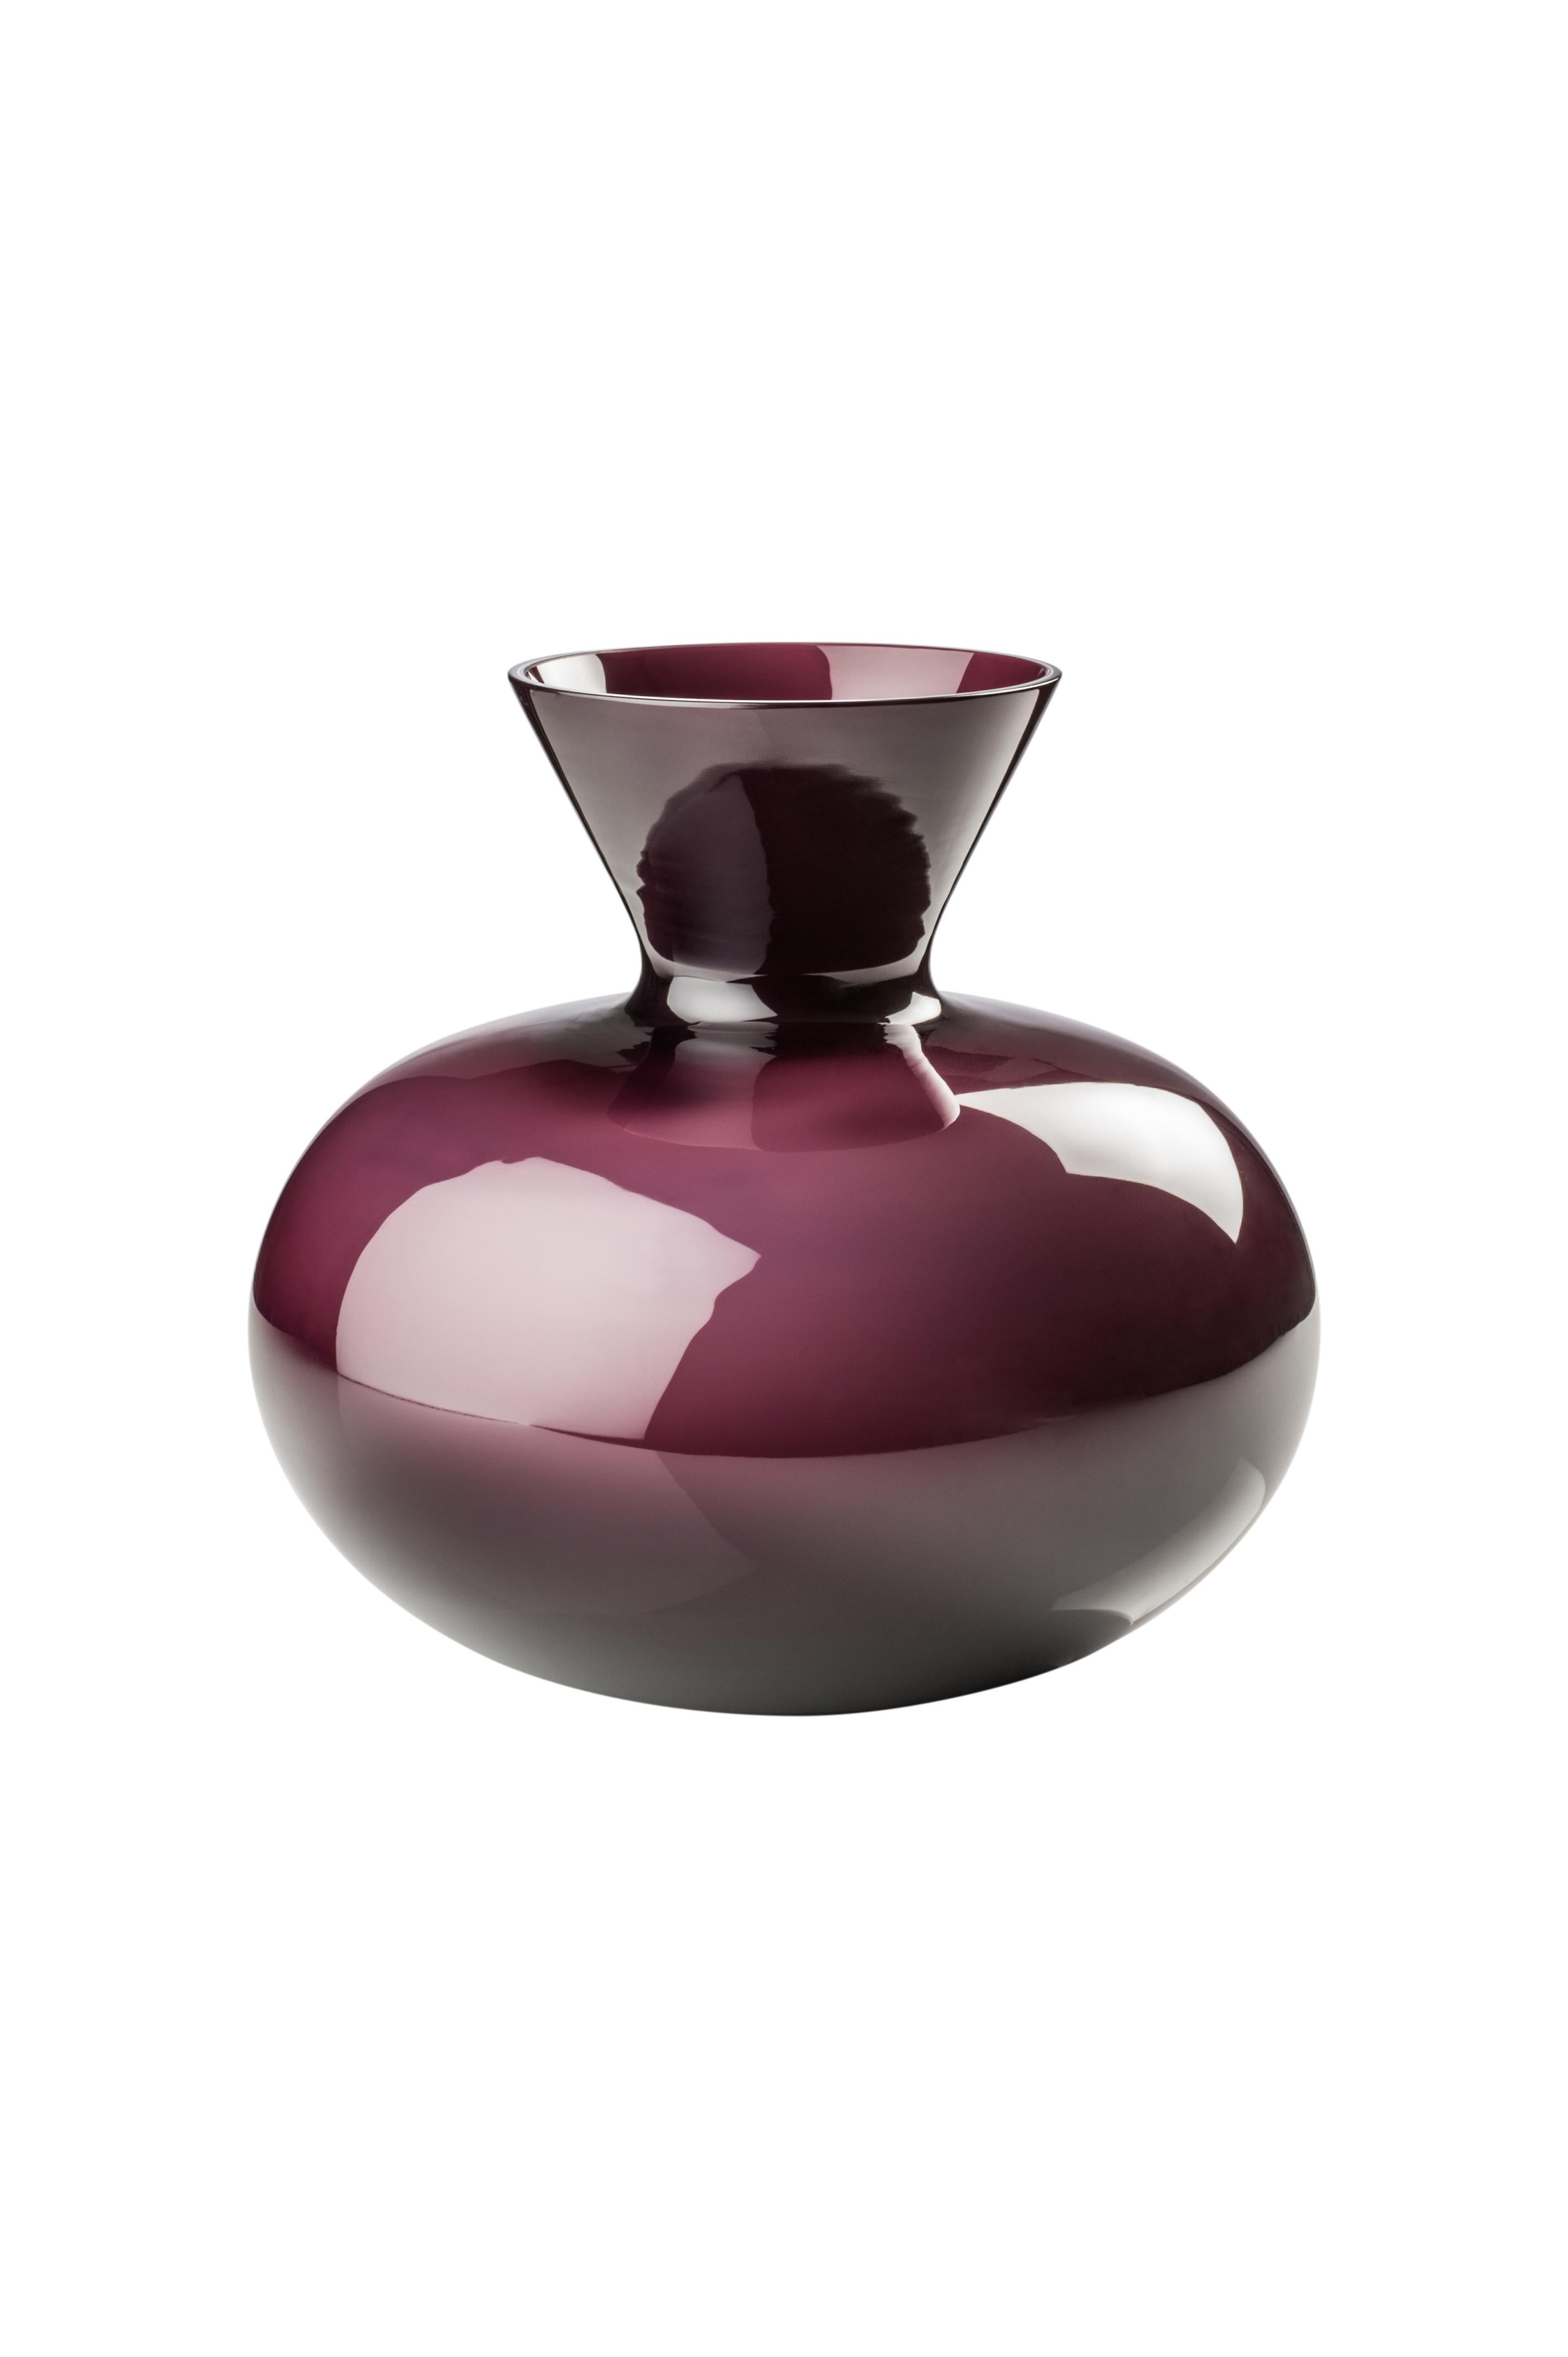 Venini glass vase with round body and angular shaped neck in violet designed in 2016. Perfect for indoor home decor as container or strong statement piece for any room. Also available in other colors on 1stdibs.

Dimensions: 30 cm diameter x 27 cm